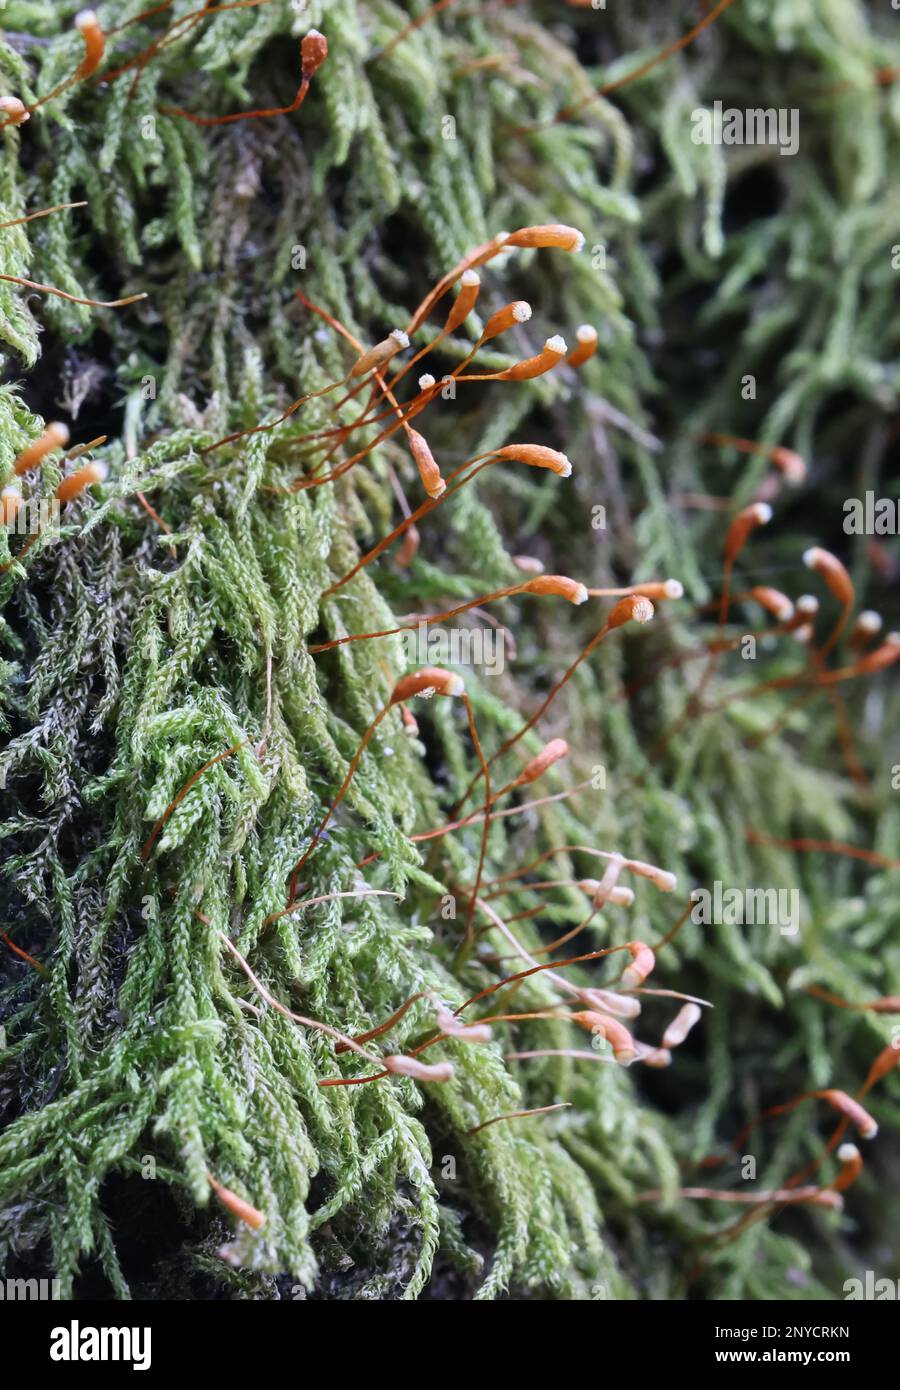 Sanionia uncinata, known as sickle-moss or sanionia moss, growing on common aspen trunk in Finland Stock Photo